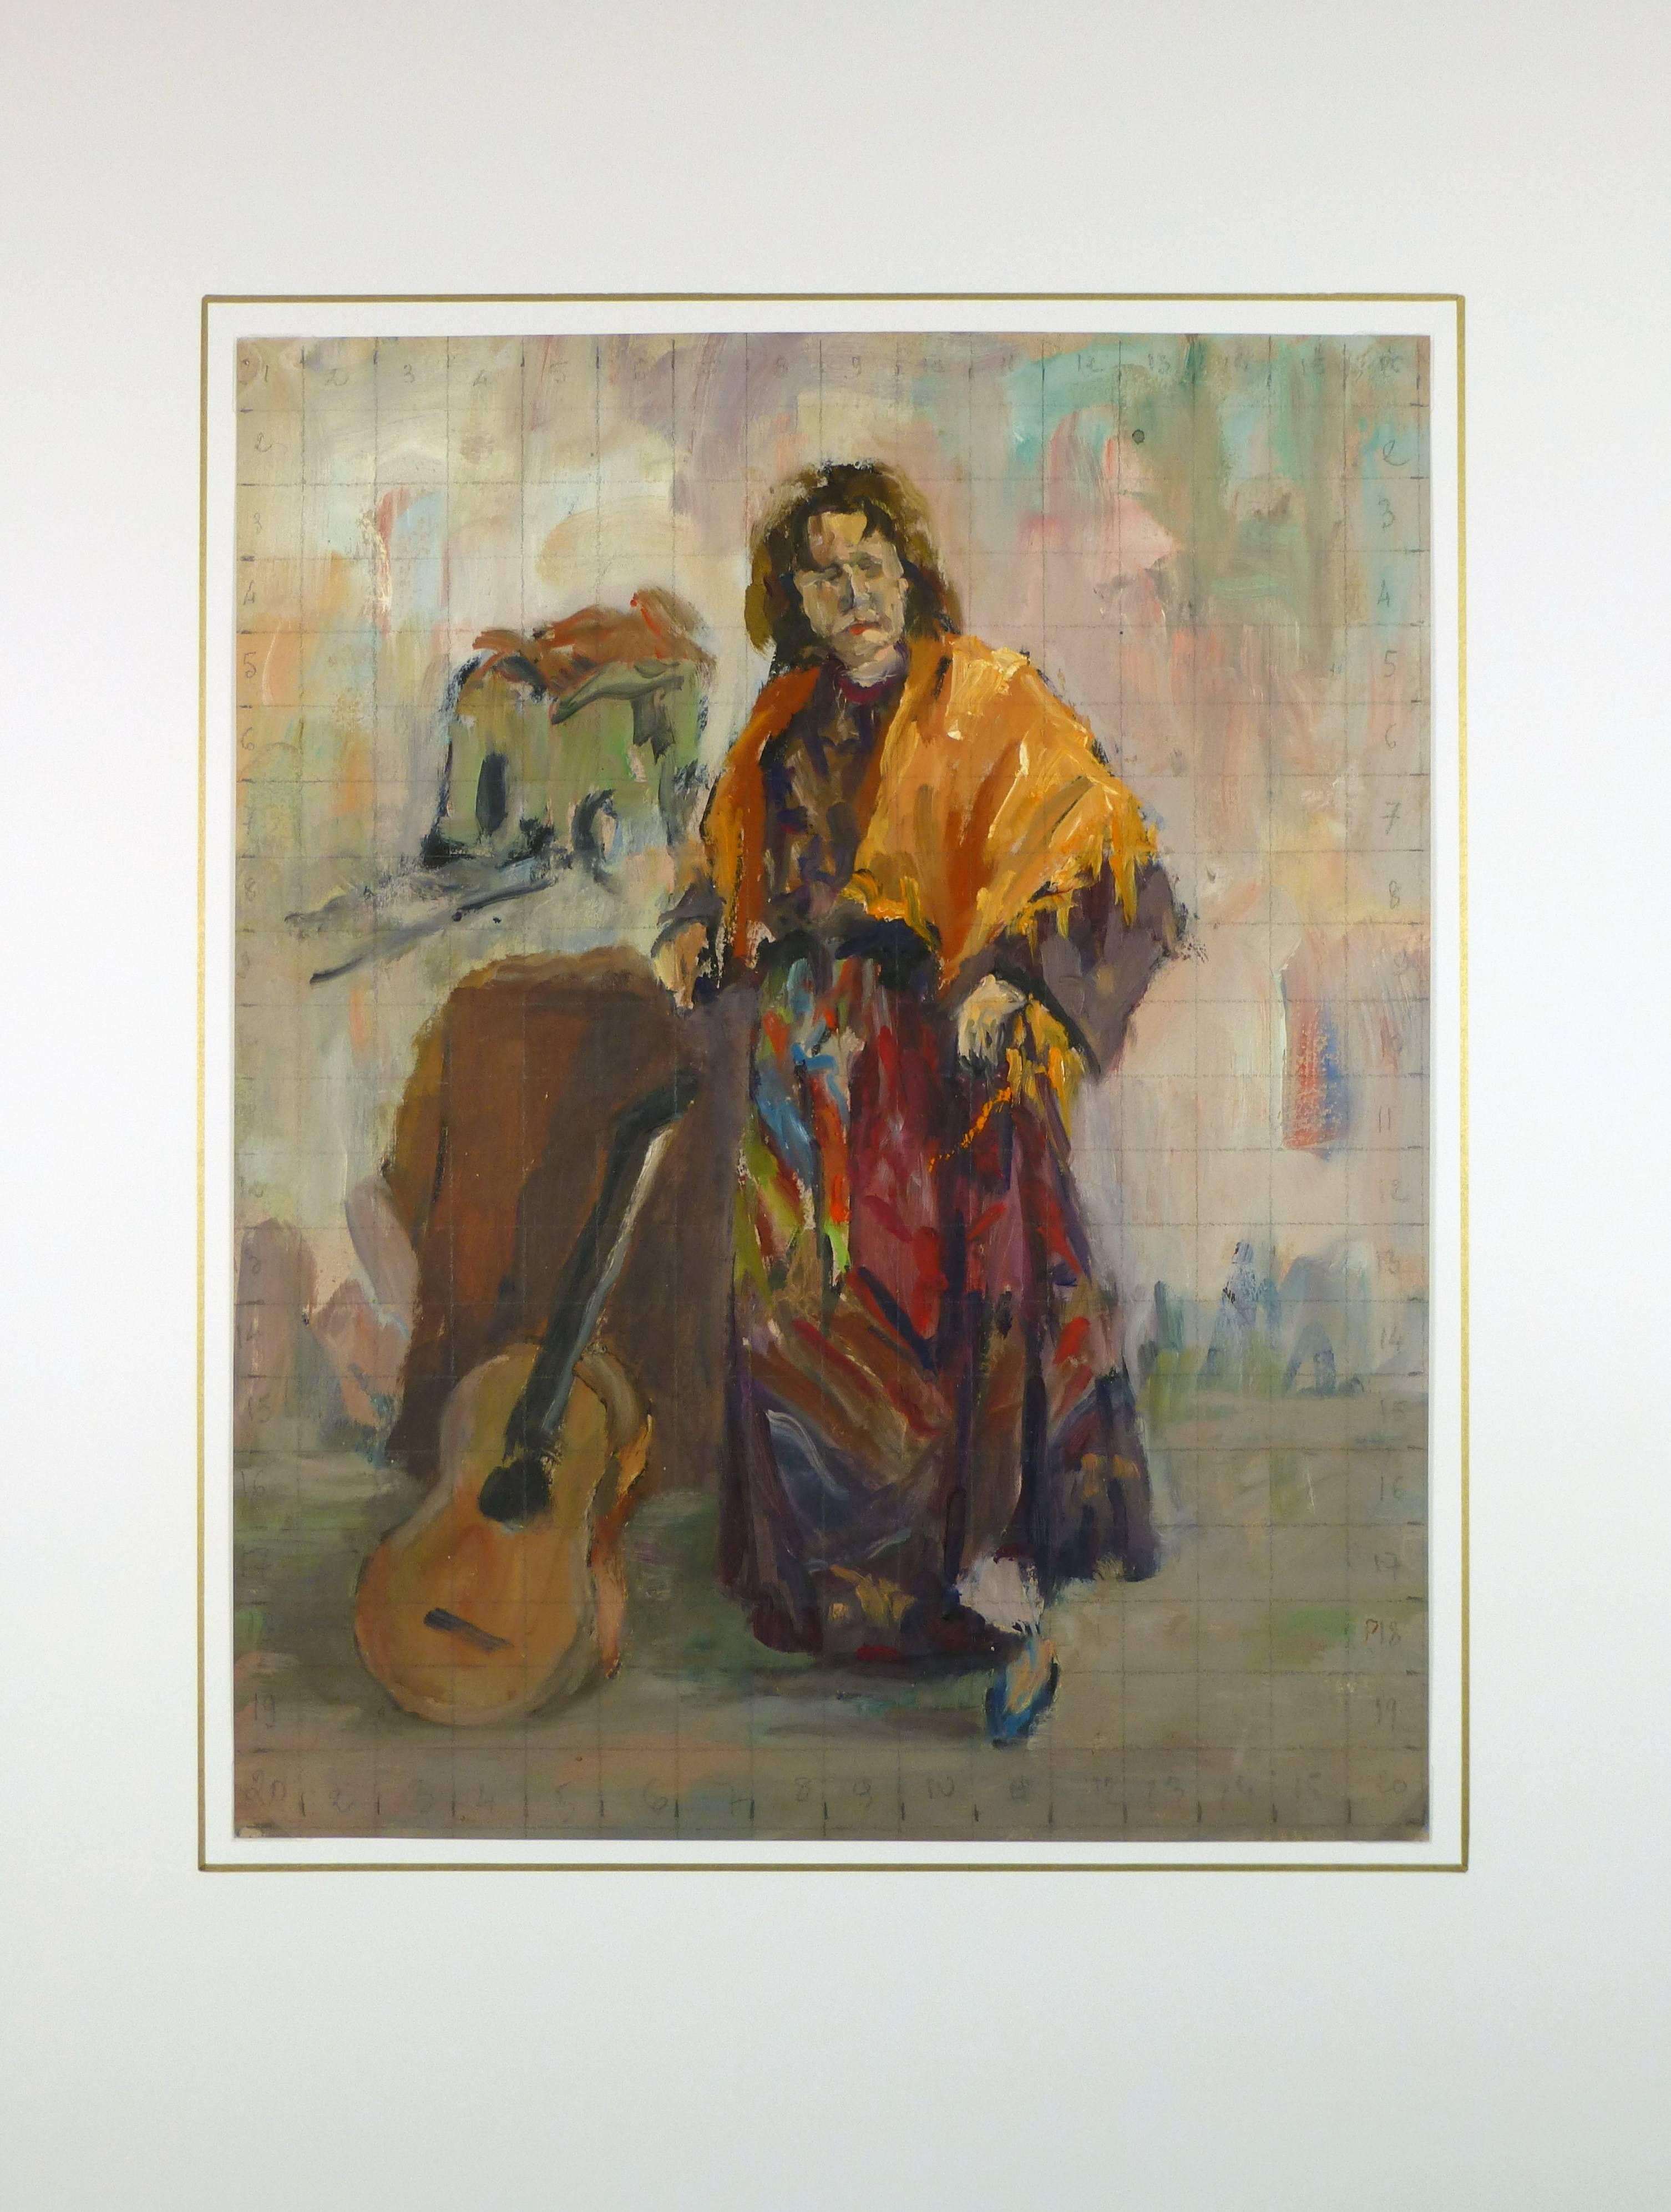 Woman with Guitar - Brown Portrait Painting by Raymond Bailly